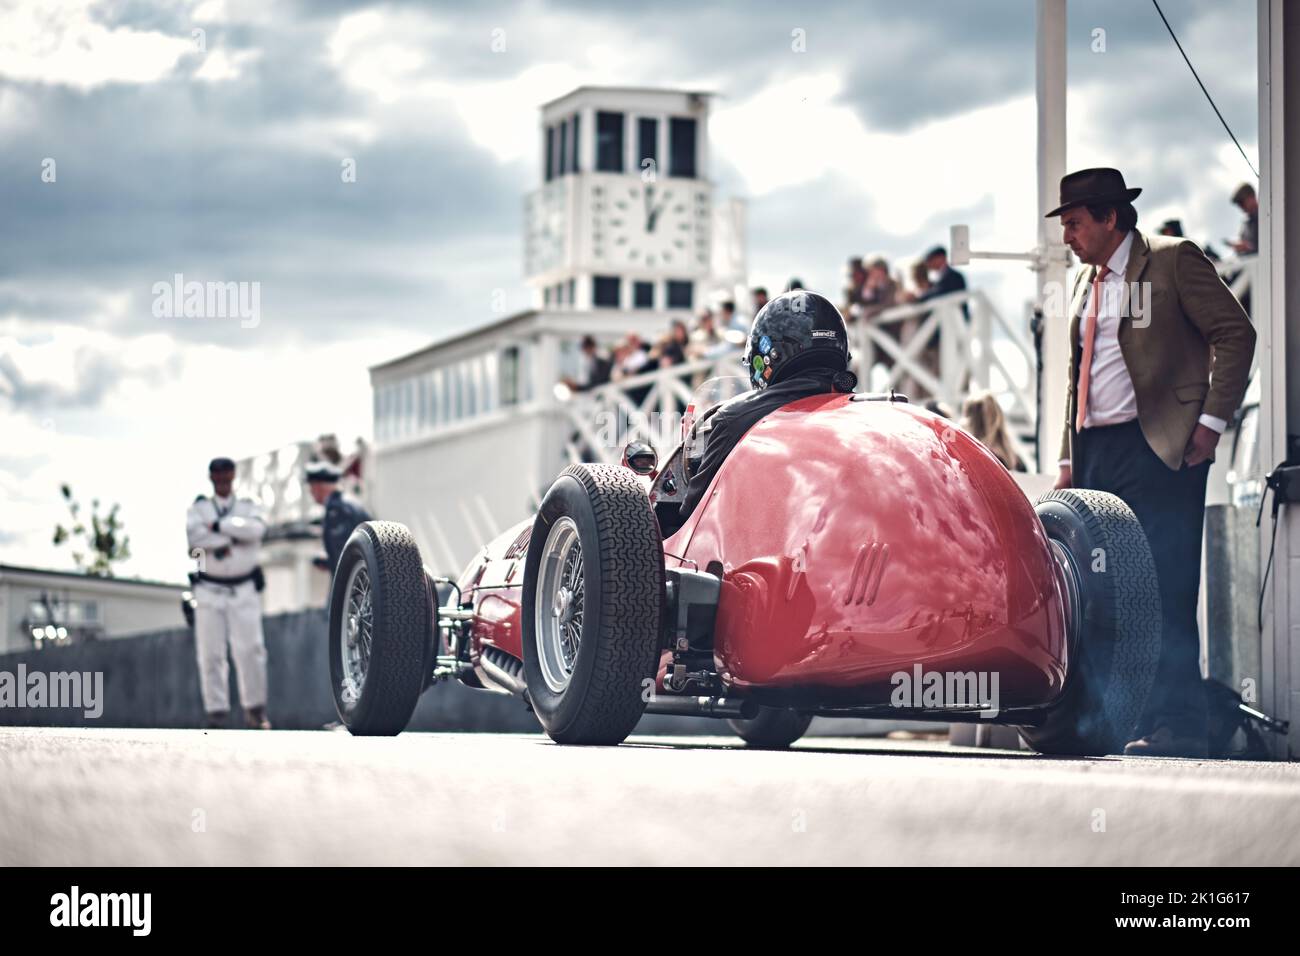 Goodwood, Chichester, UK. 18th Sept, 2022.  Ferrari 75th Anniversary Celebration during the 2022 Goodwood Revival (Photo by Gergo Toth / Alamy Live News) Stock Photo